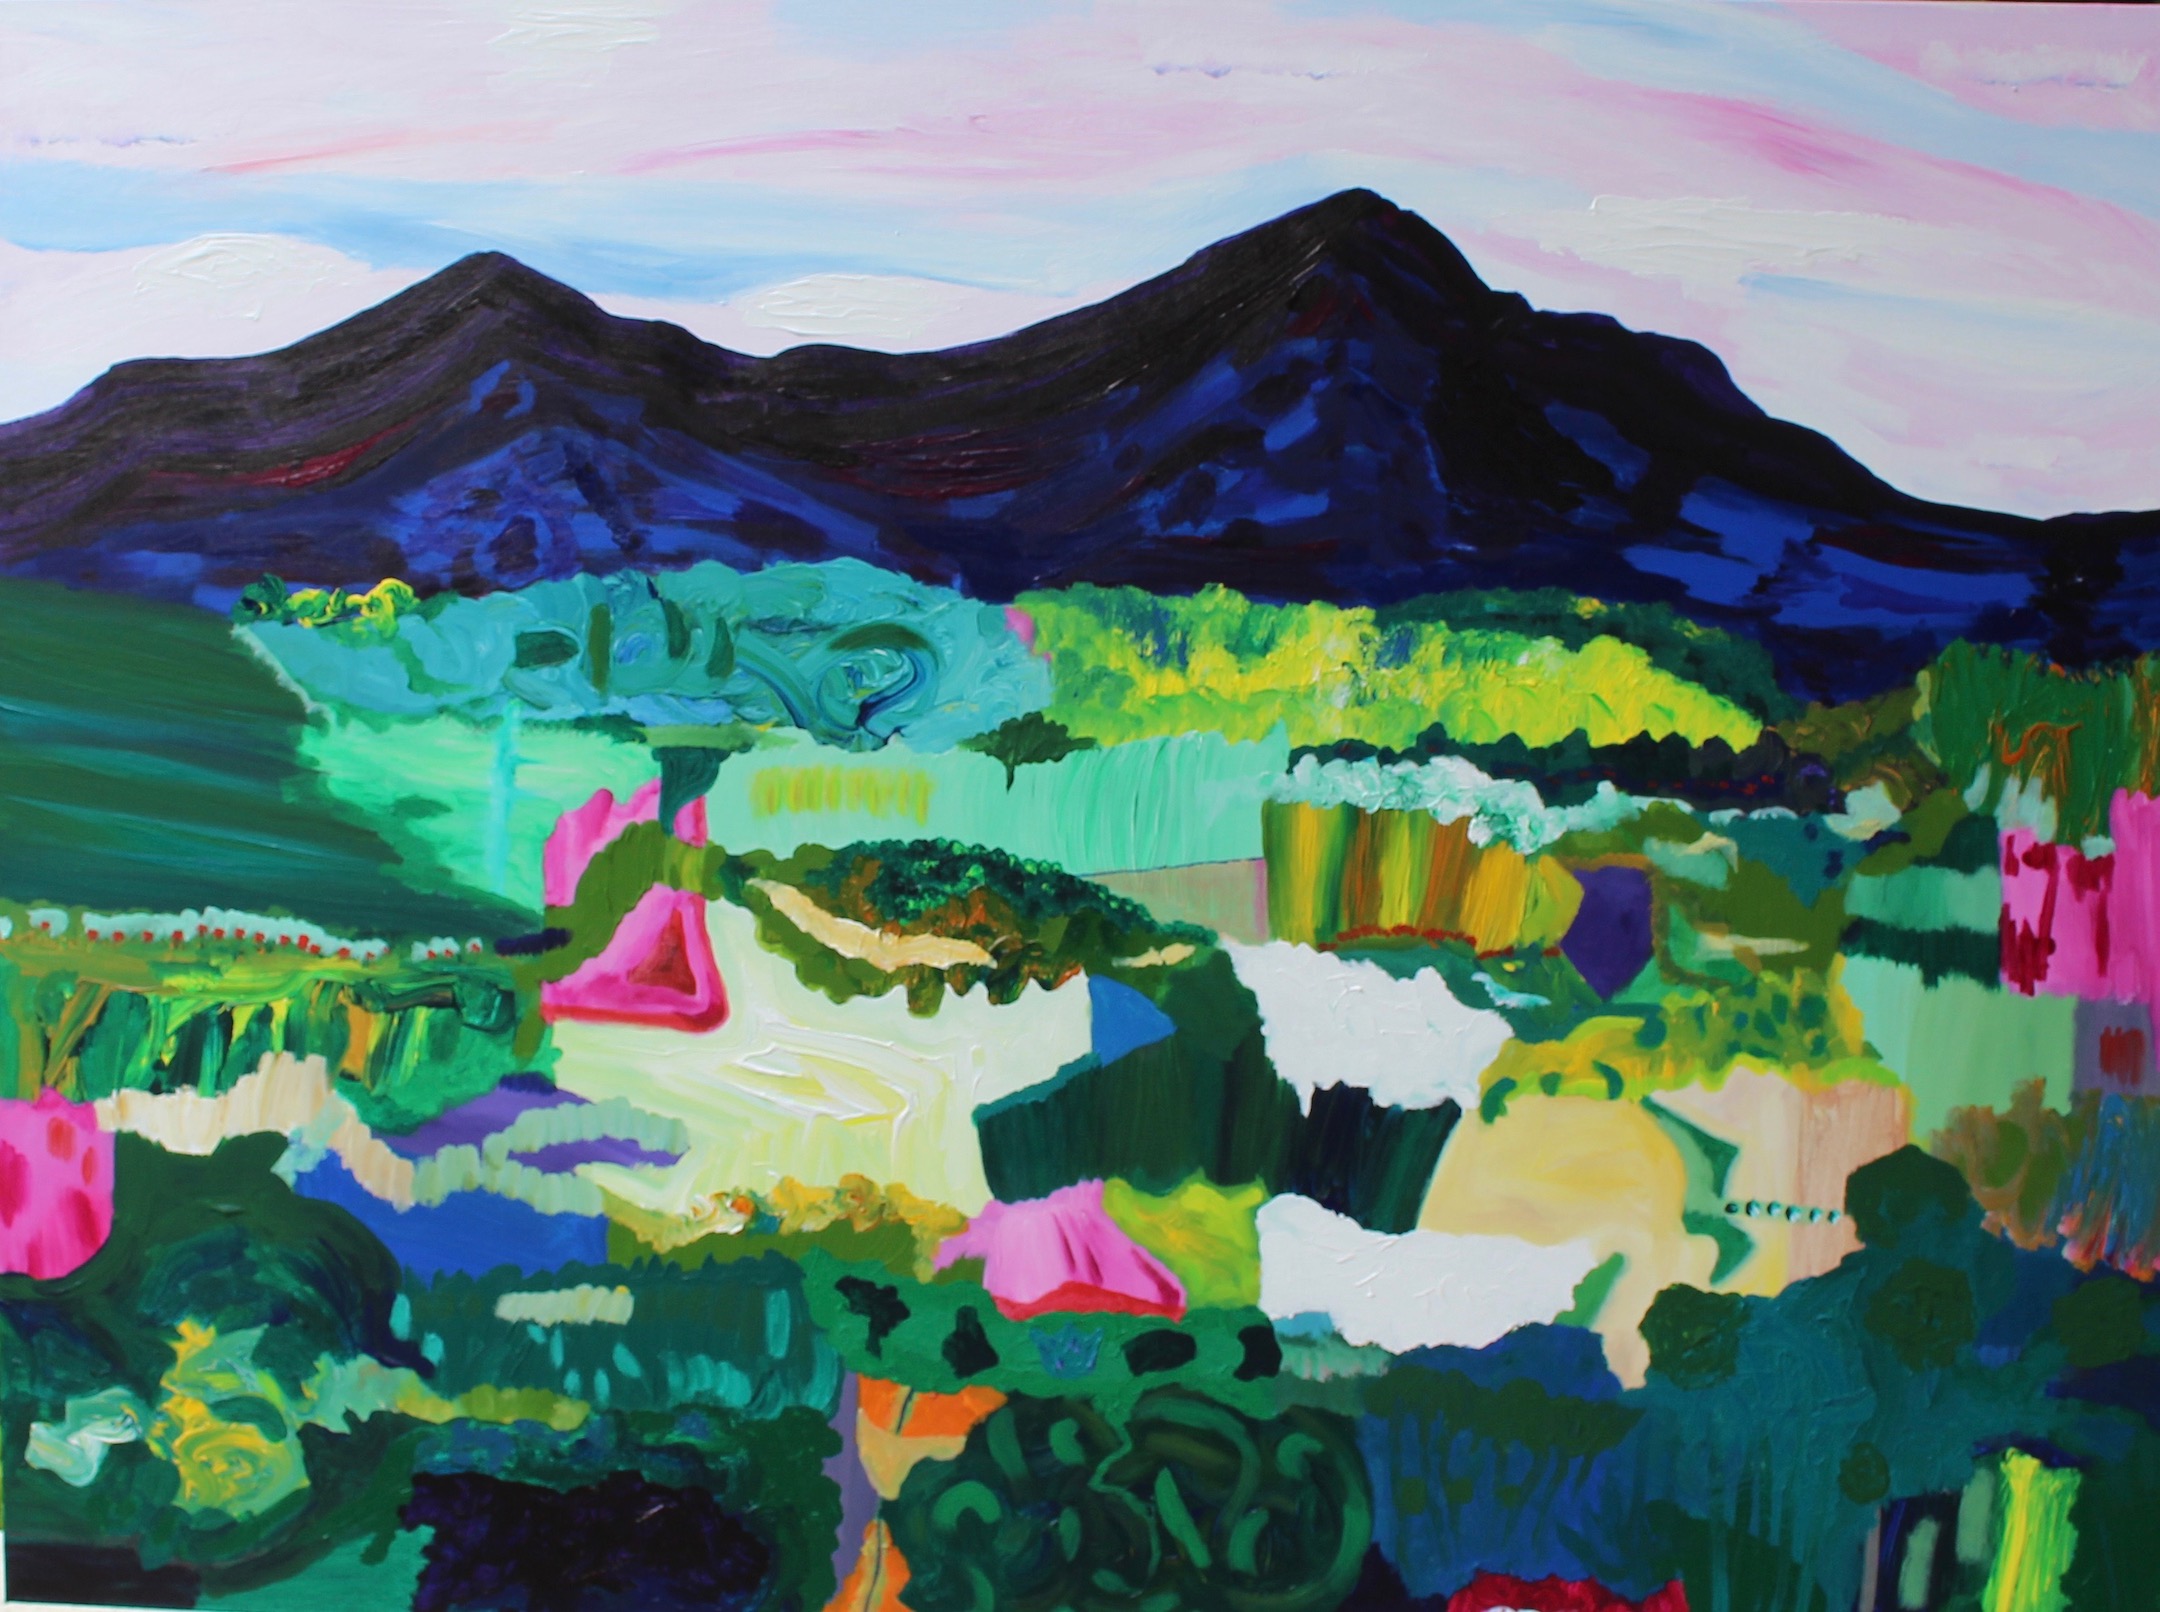 Whiteface and Passaconaway 2, Russell Steven Powell acrylic on canvas, 48x36